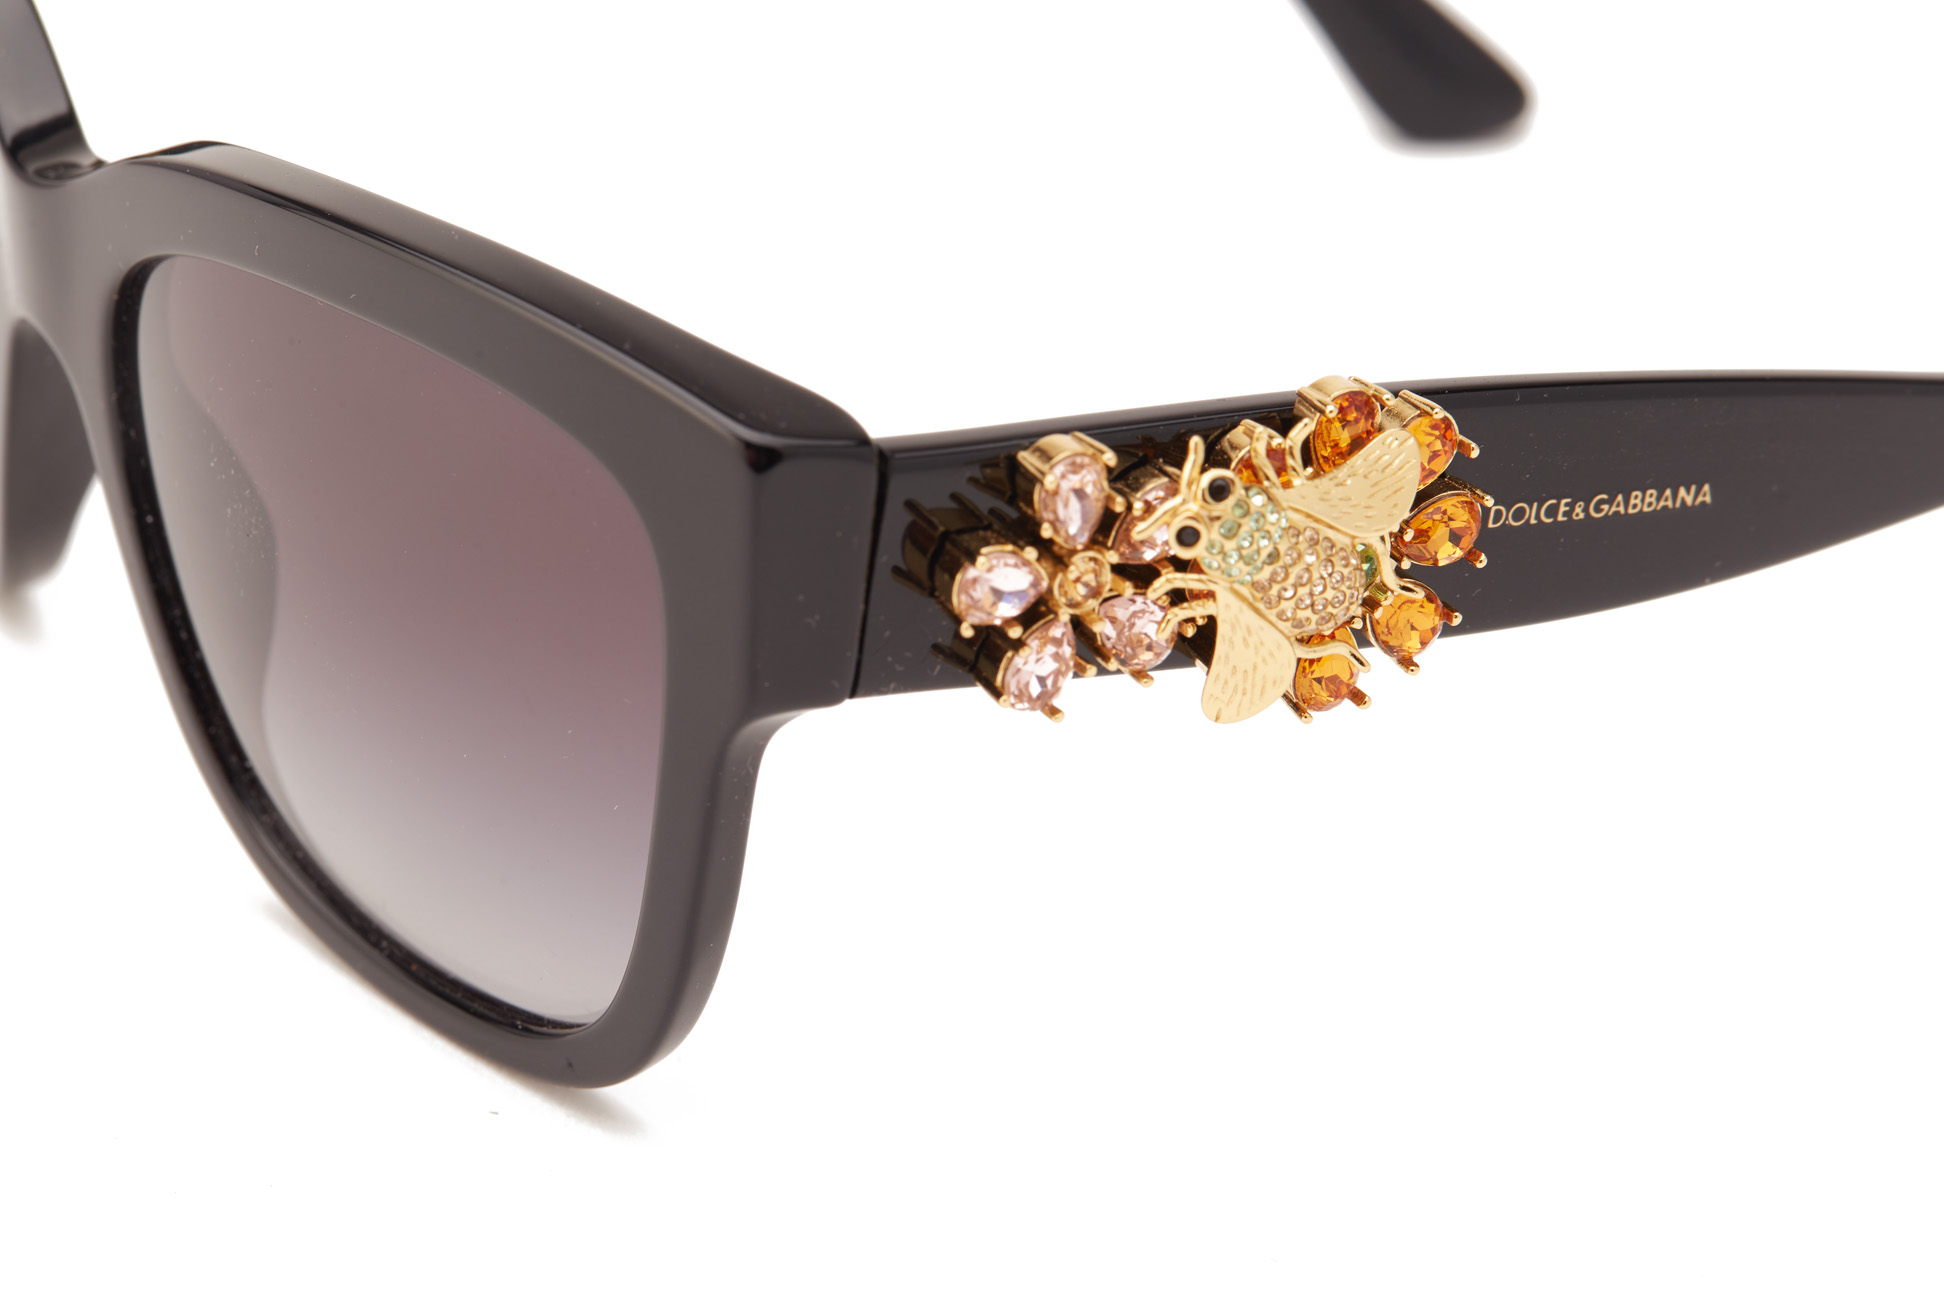 A PAIR OF DOLCE & GABBANA 'ENCHANTED BEAUTIES' SUNGLASSES - Image 3 of 4